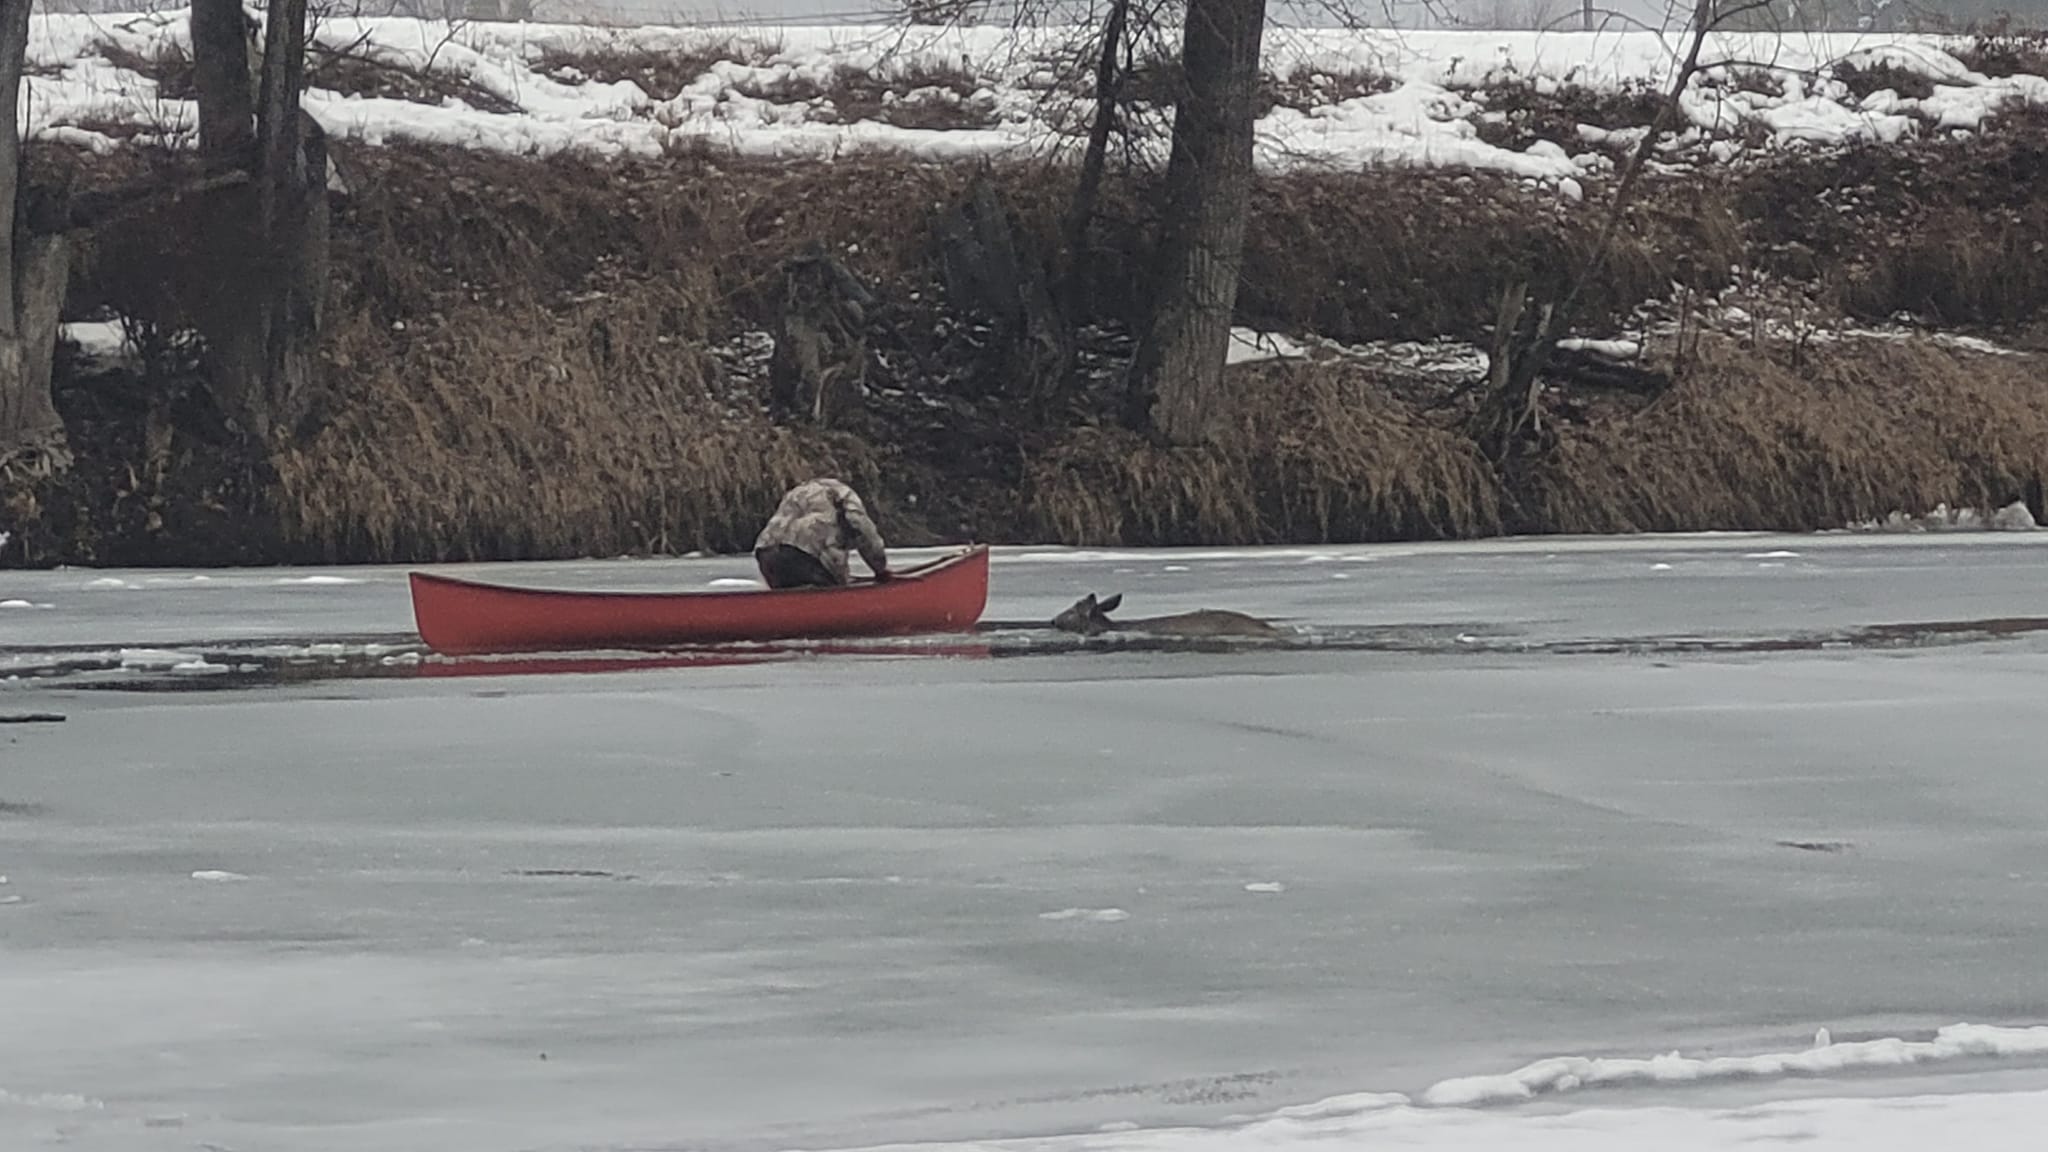 The longtime hunting guide used a canoe to tow the deer back to dry land.